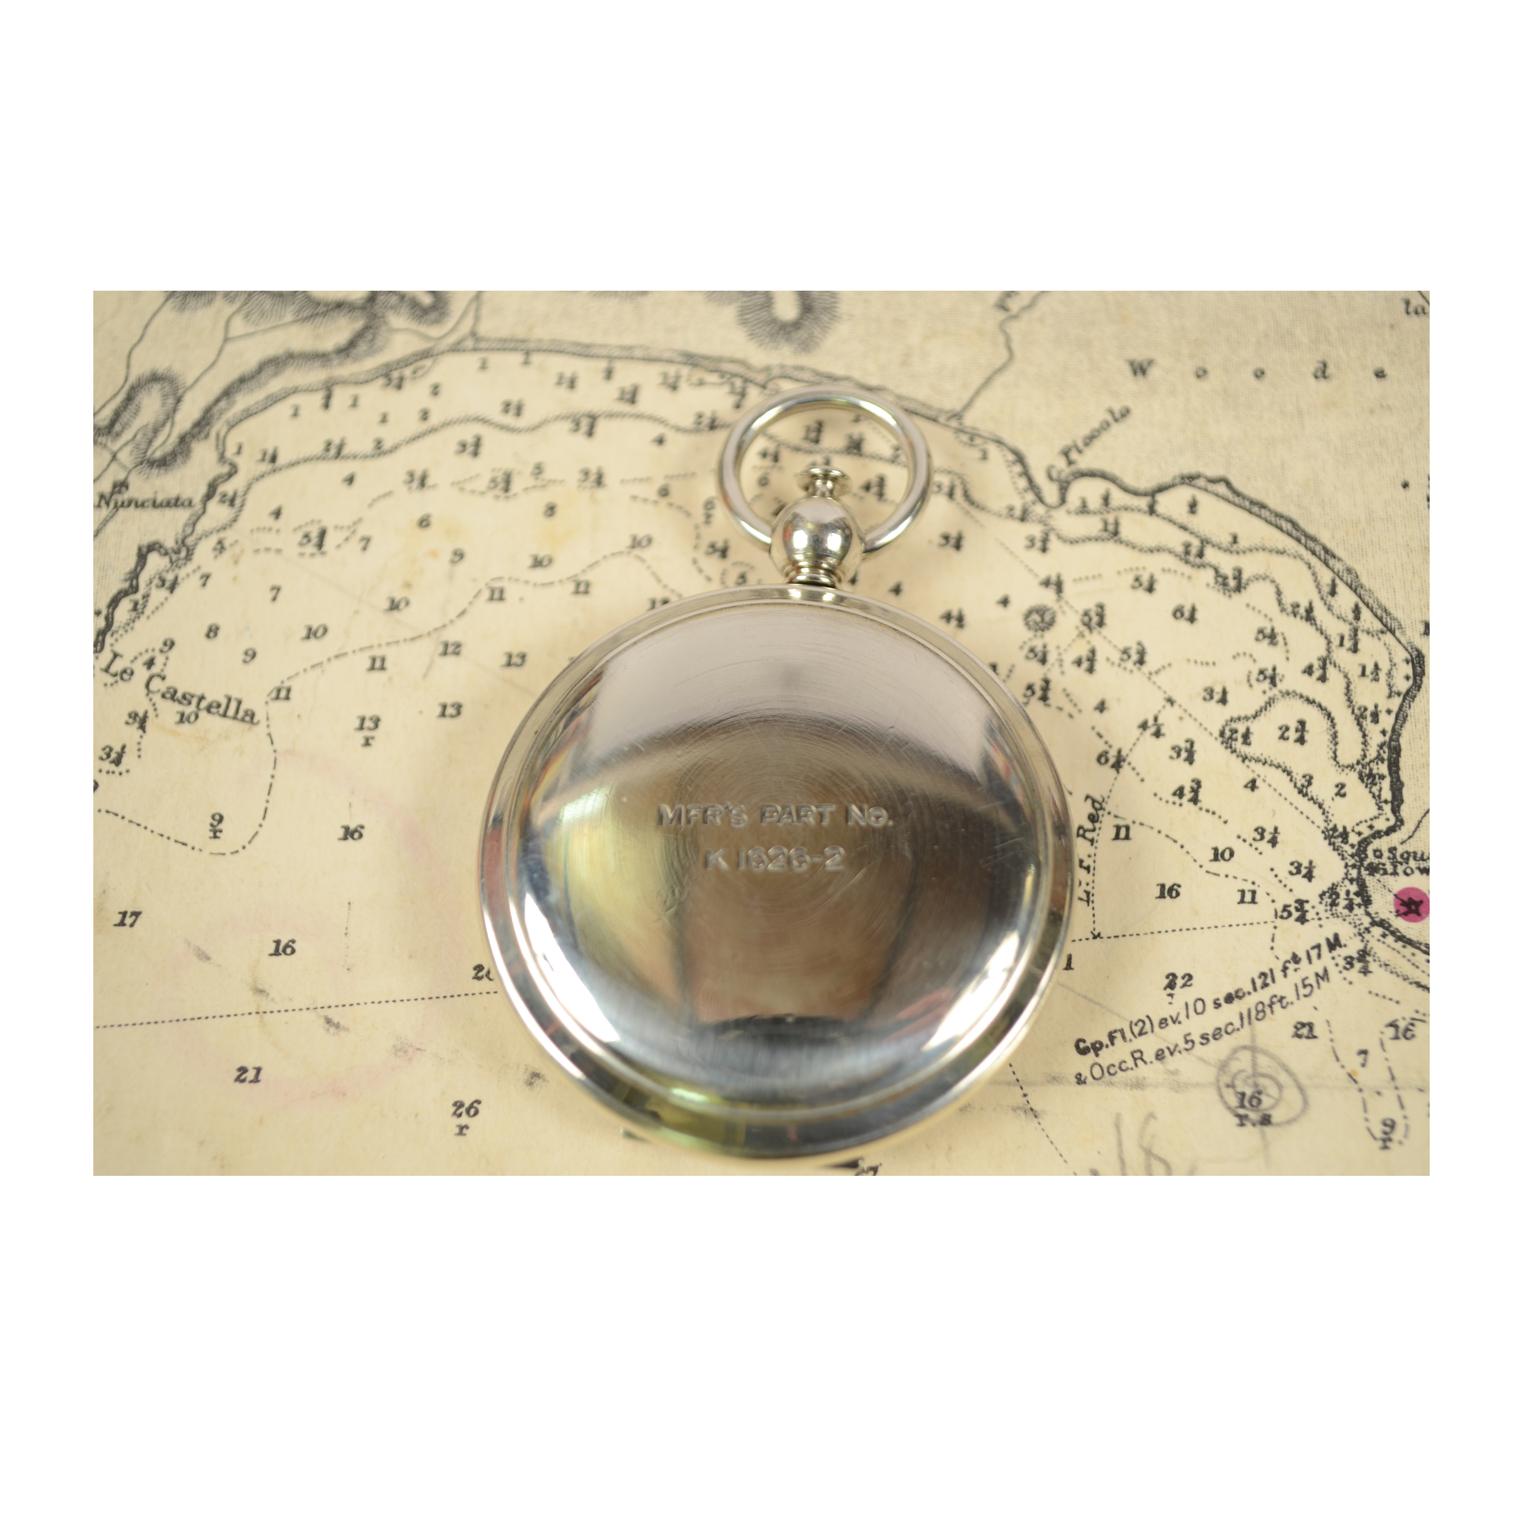 Compass Used by the American Aviation Officers in the 1920s Signed Wittnauer 3